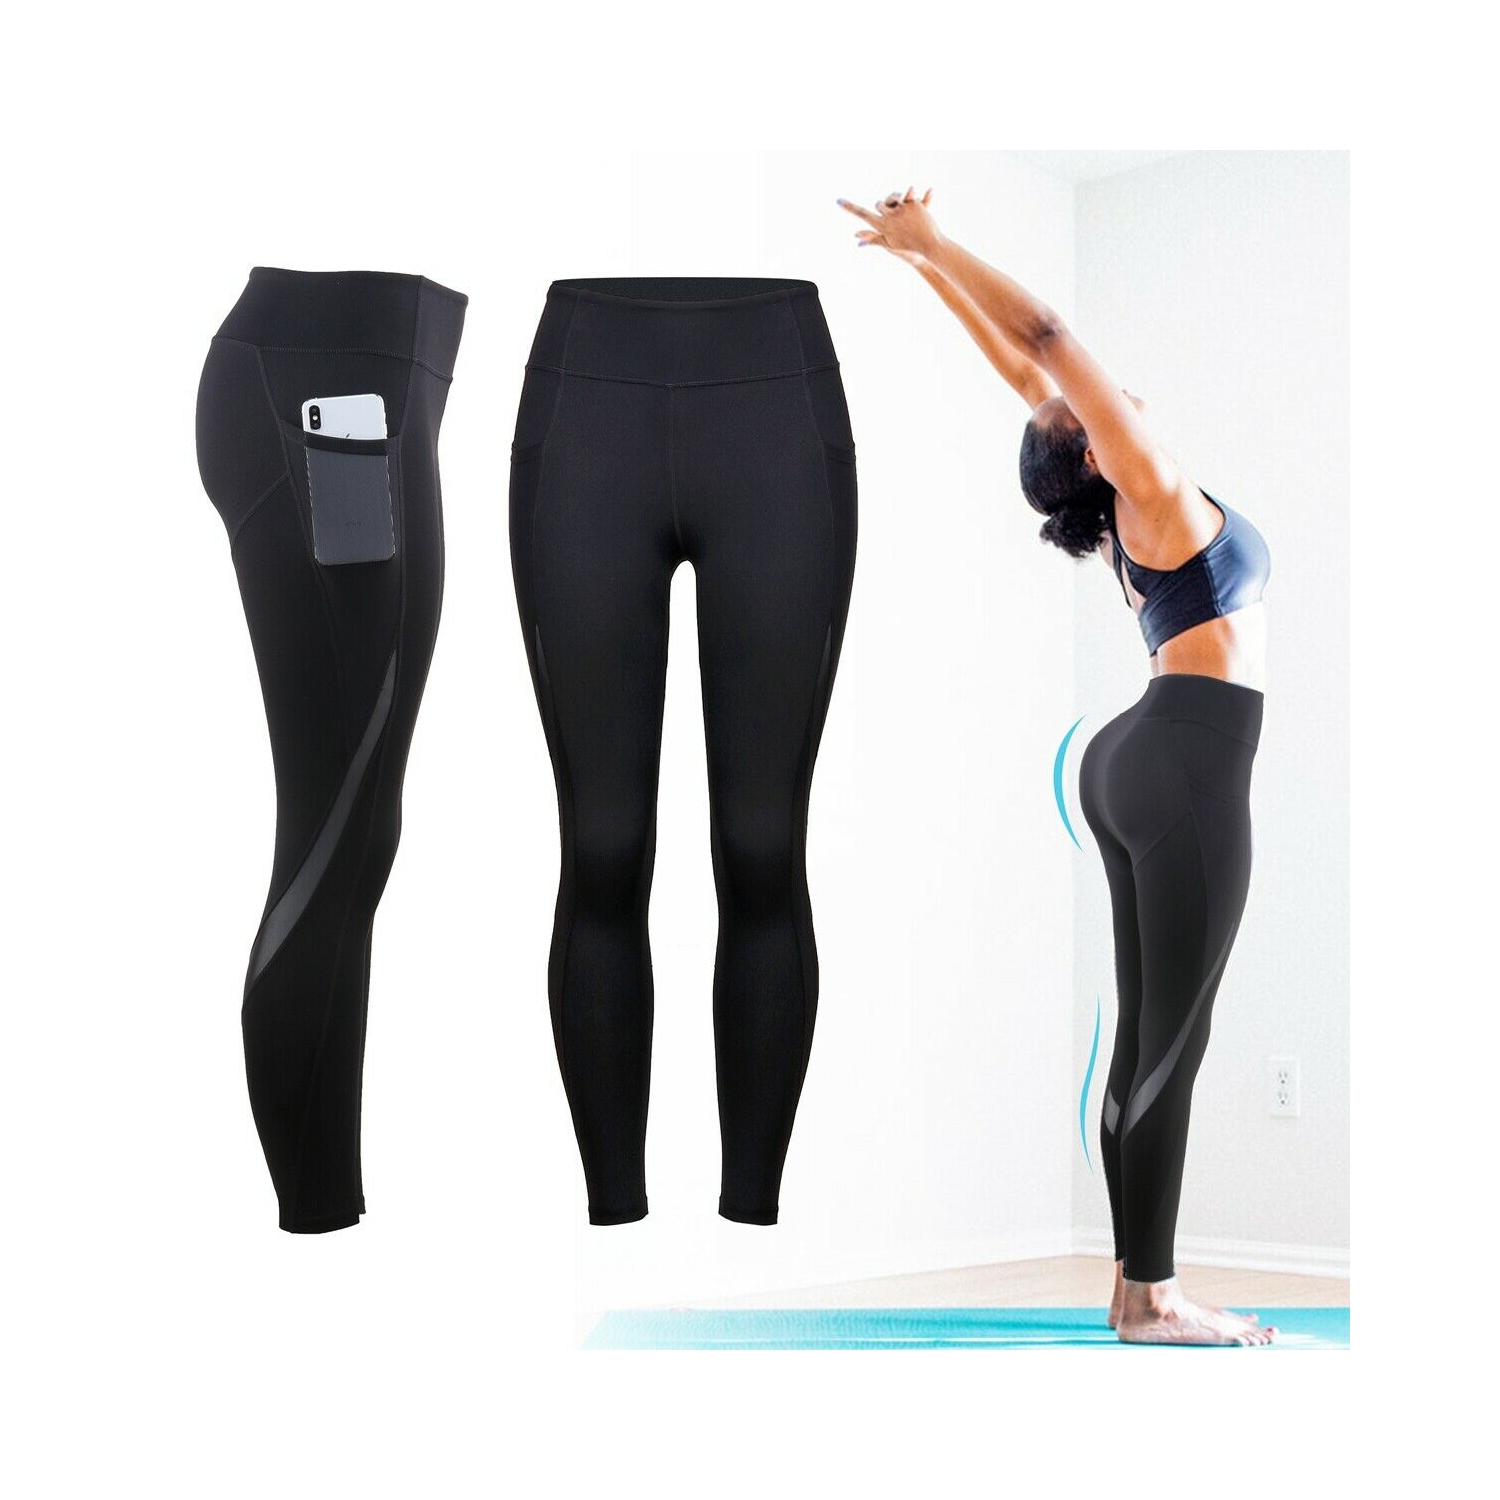 OBFUN 7 Pack High Waisted Leggings for Women - Soft Tummy Control